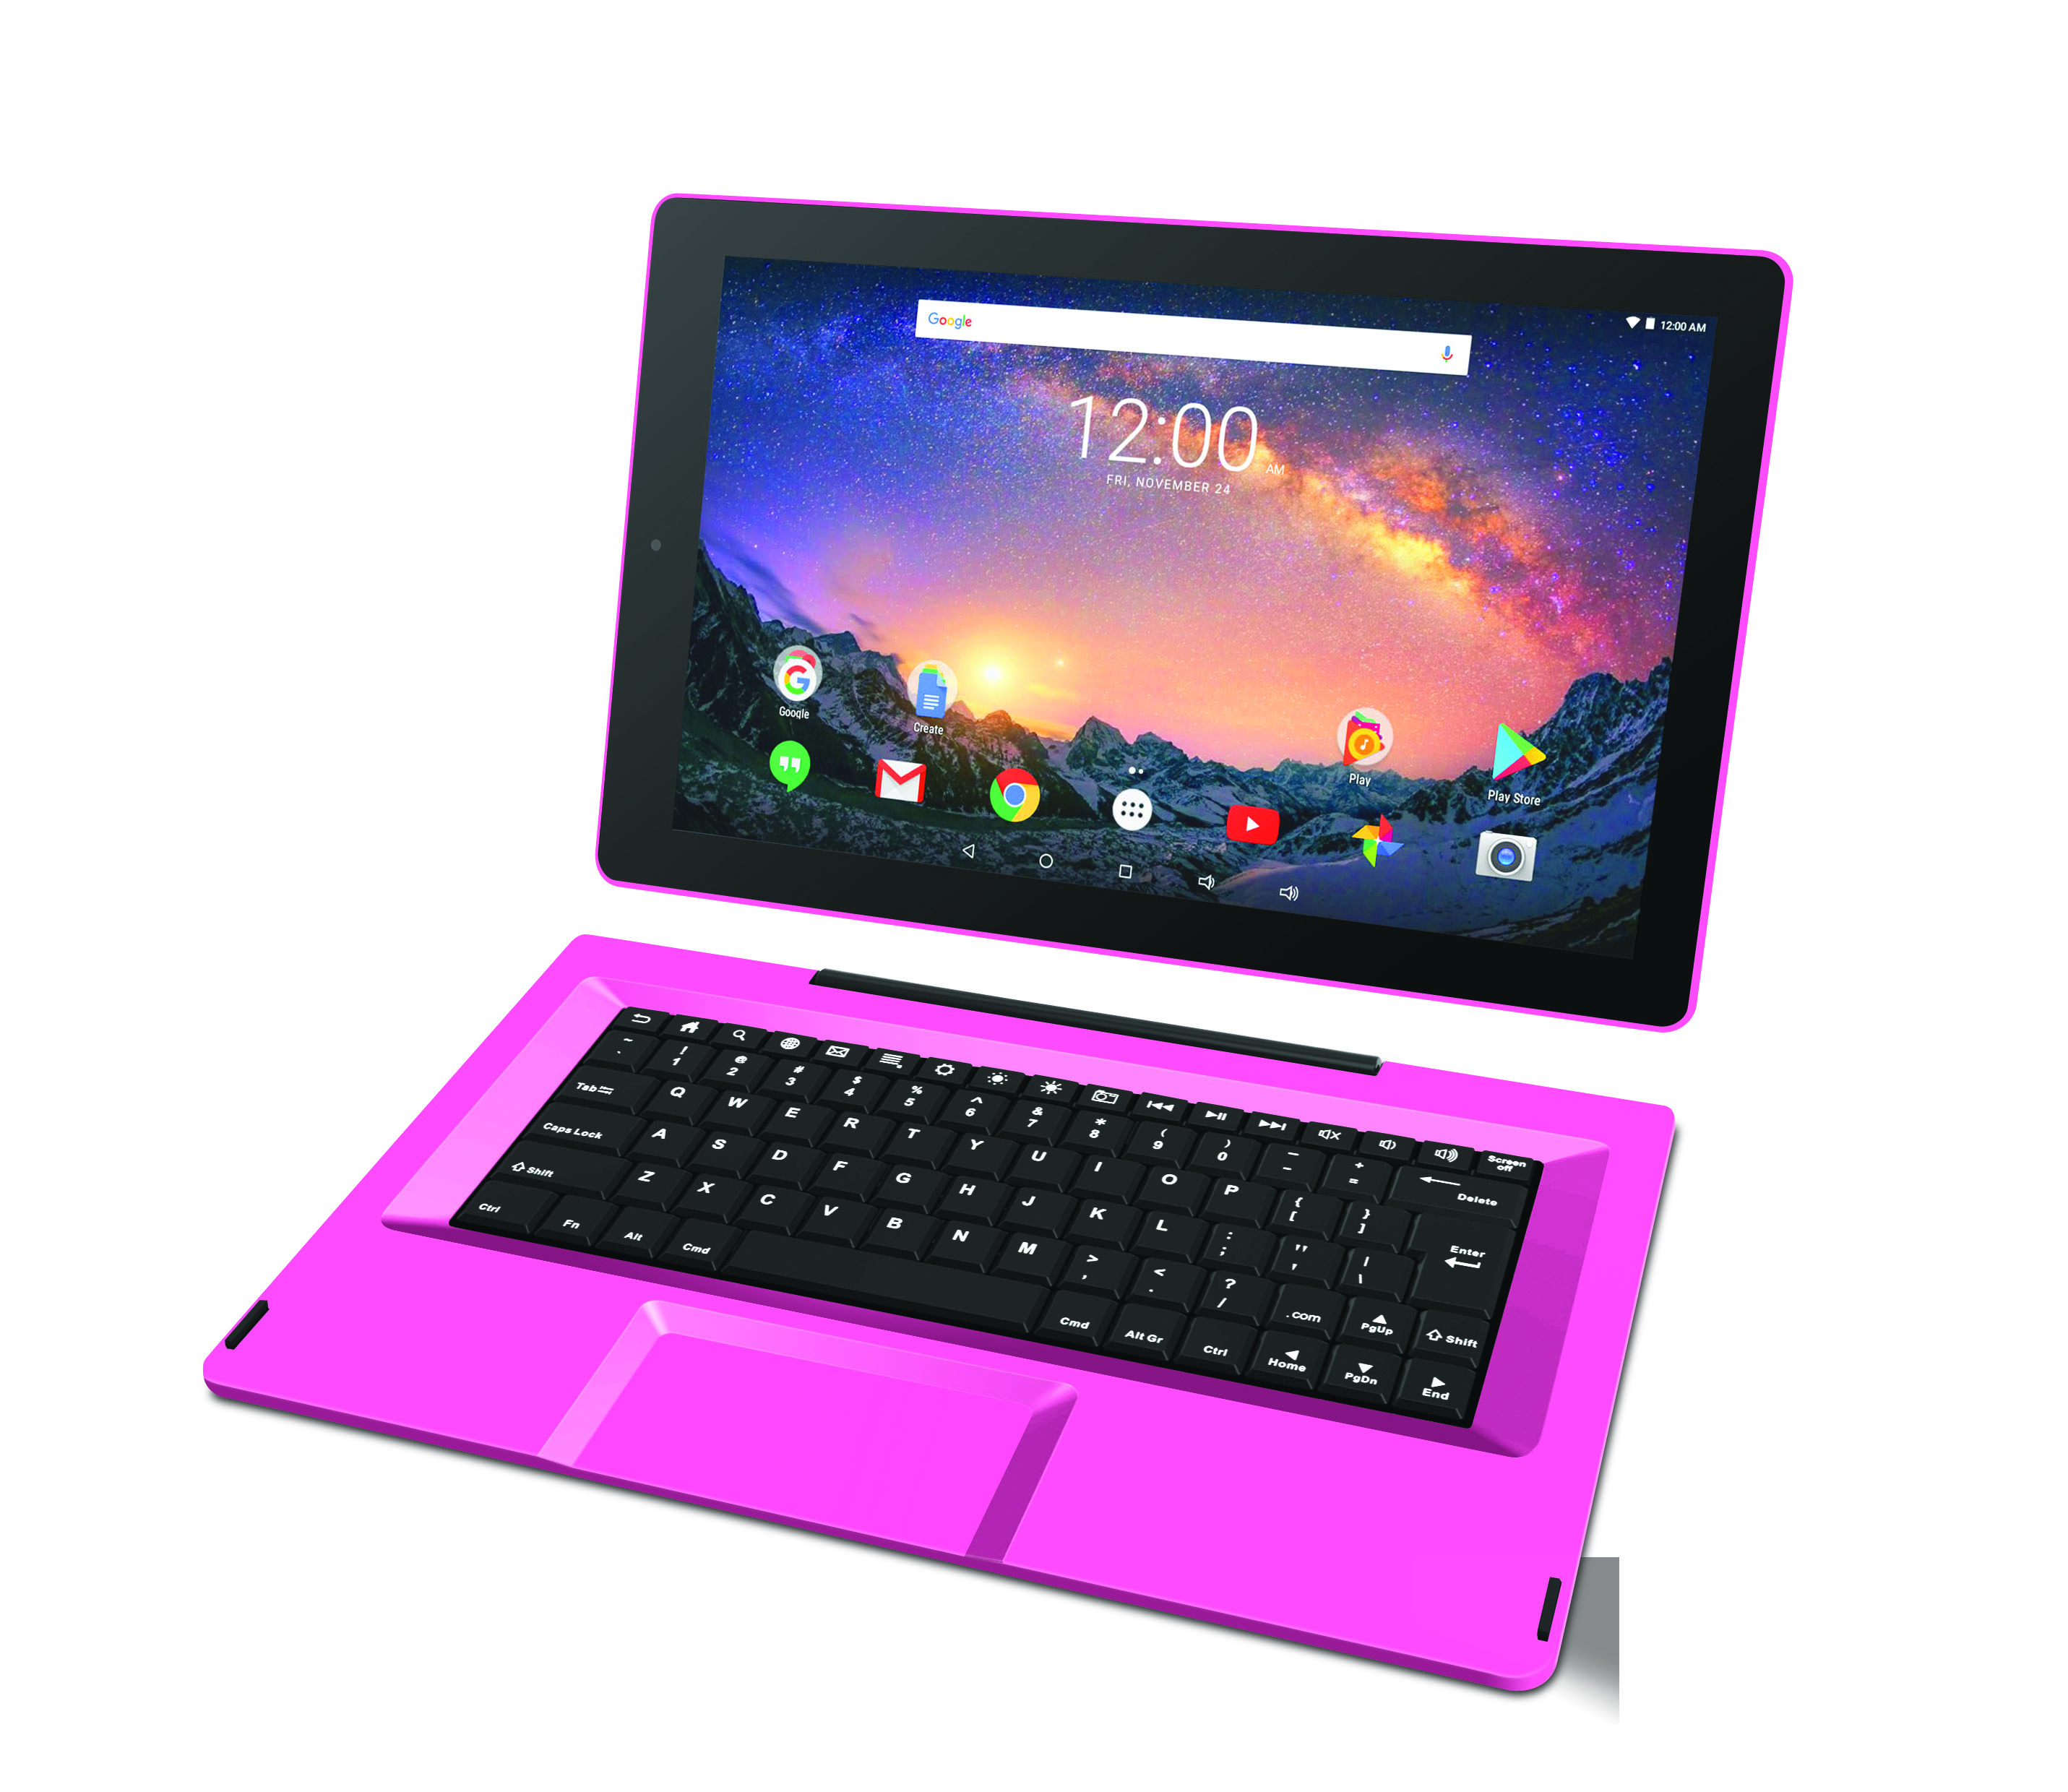 RCA Galileo Pro 11.5" 32GB 2-in-1 Tablet with Keyboard Case Android OS, Pink (Google Classroom Ready) - image 2 of 4